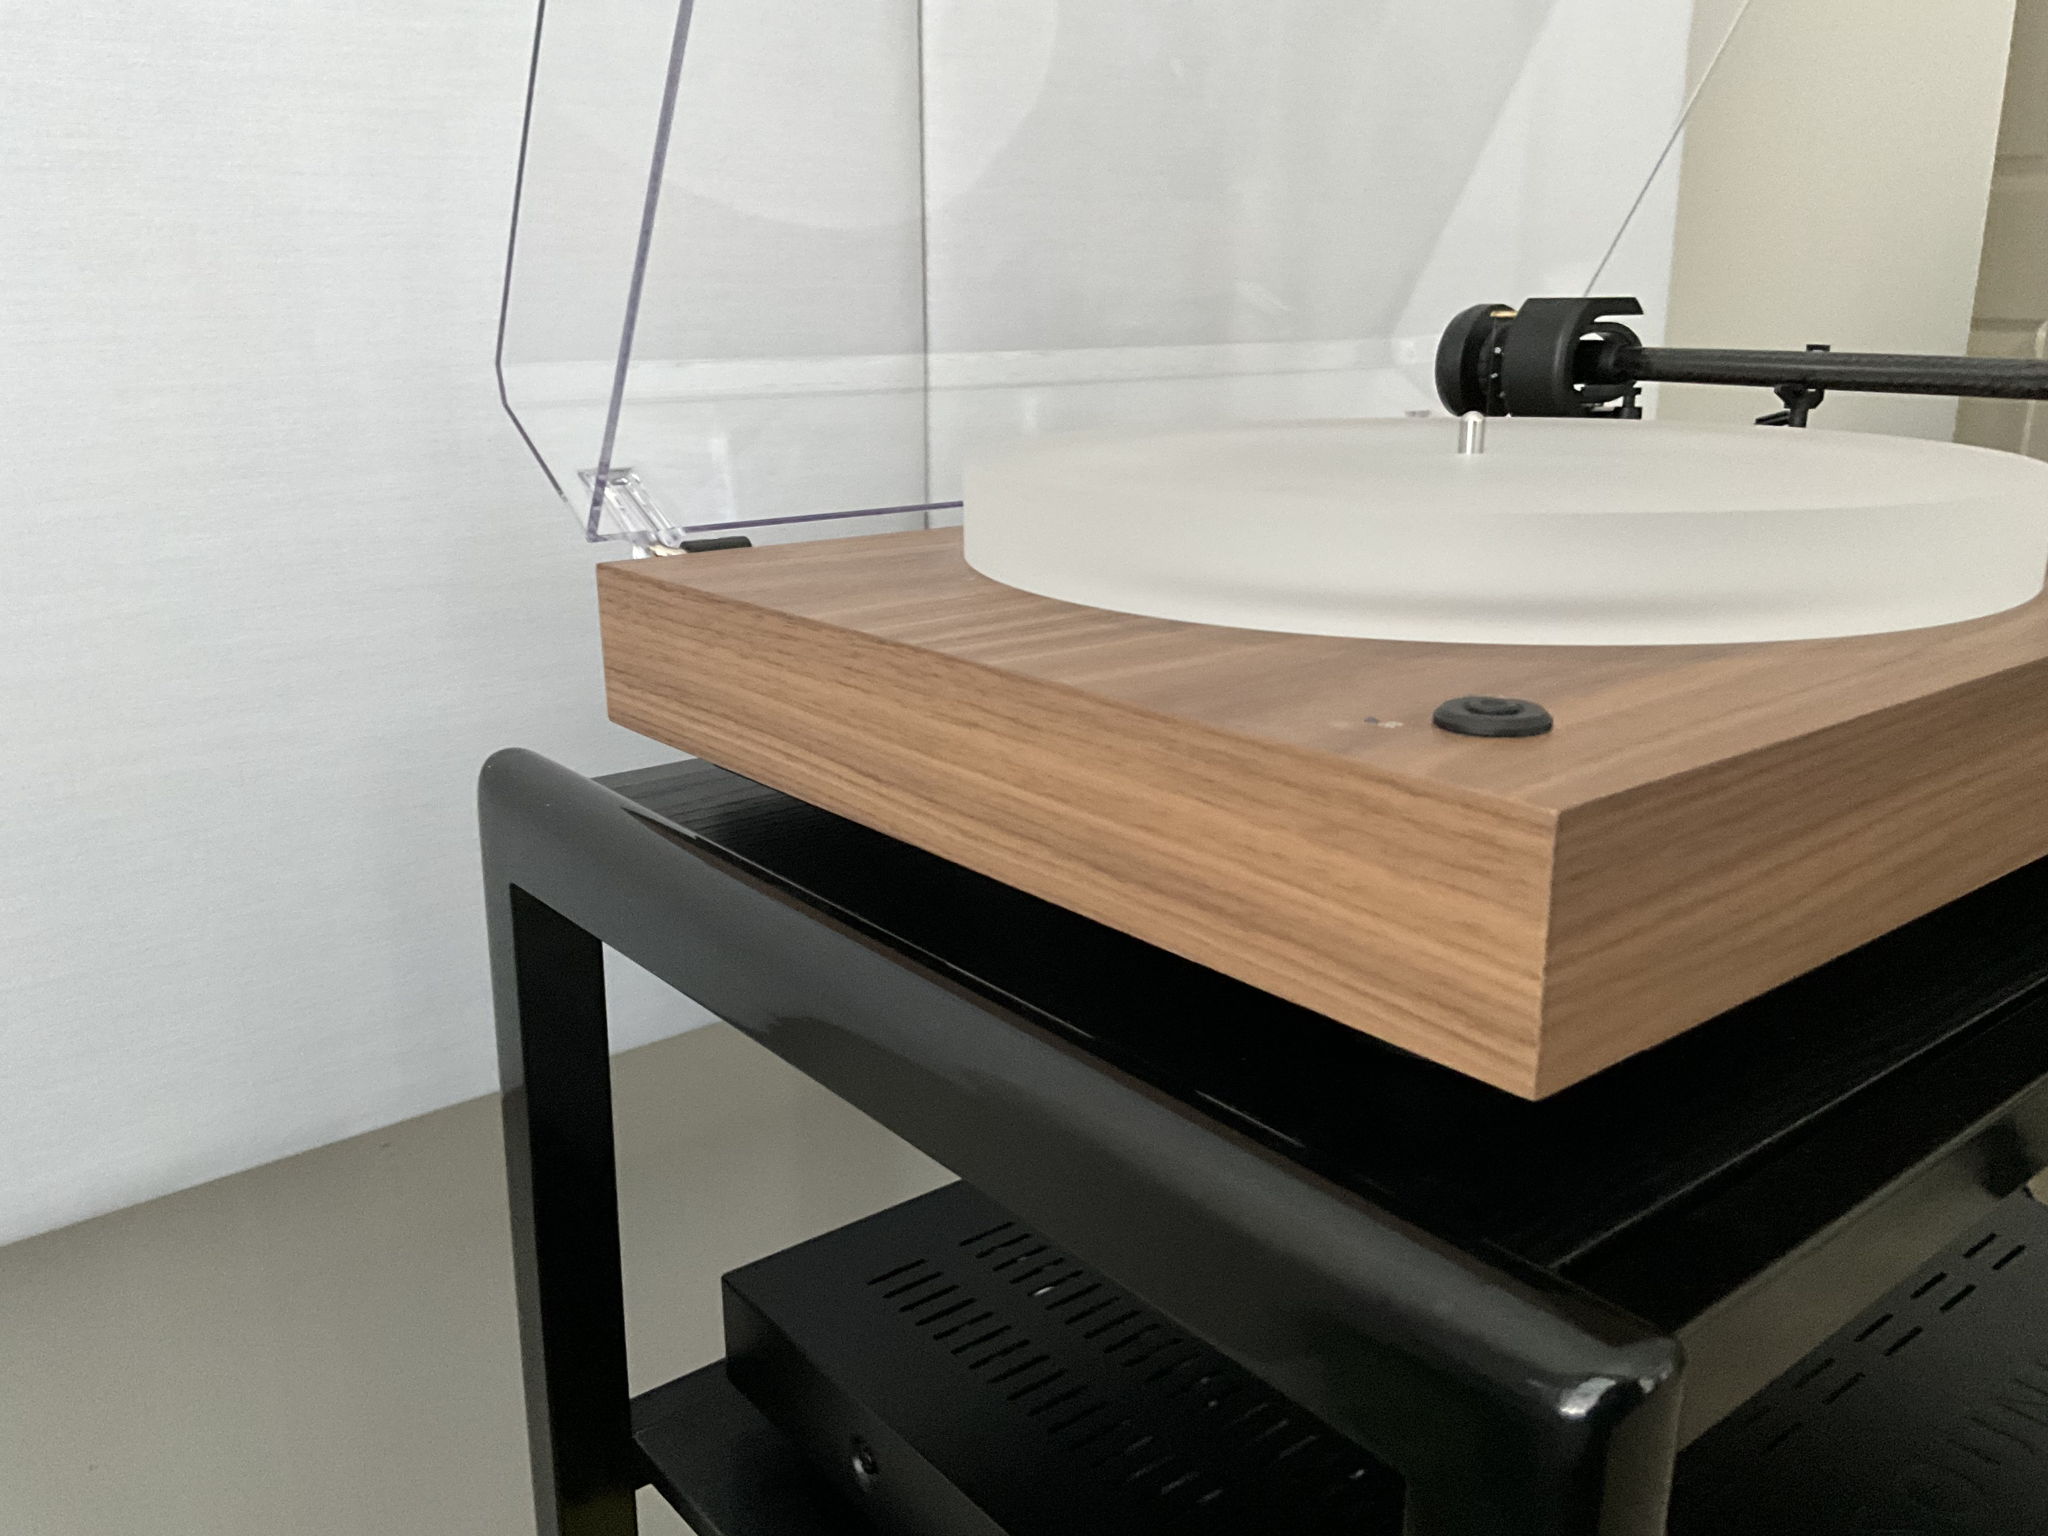 Pro-Ject X2 Turntable with Sumiko Moonstone cartridge 3